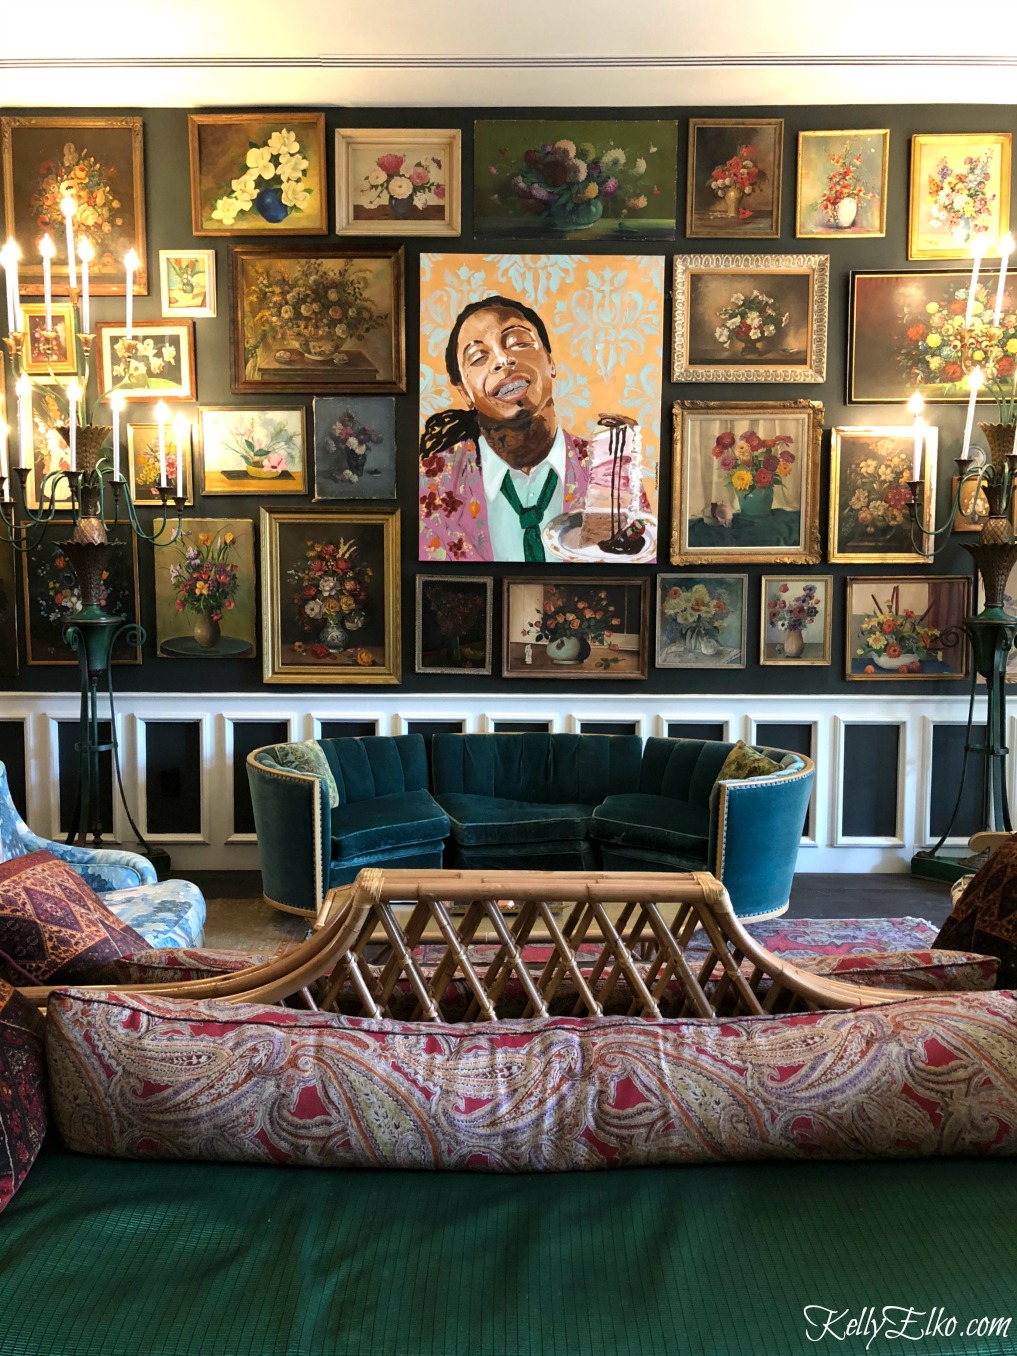 Best of New Orleans - what to see, do and eat. Love this eclectic gallery wall at The Pontchartrain Hotel in New Orleans kellyelko.com #neworleans #nola #travel #vacation #gallerywall